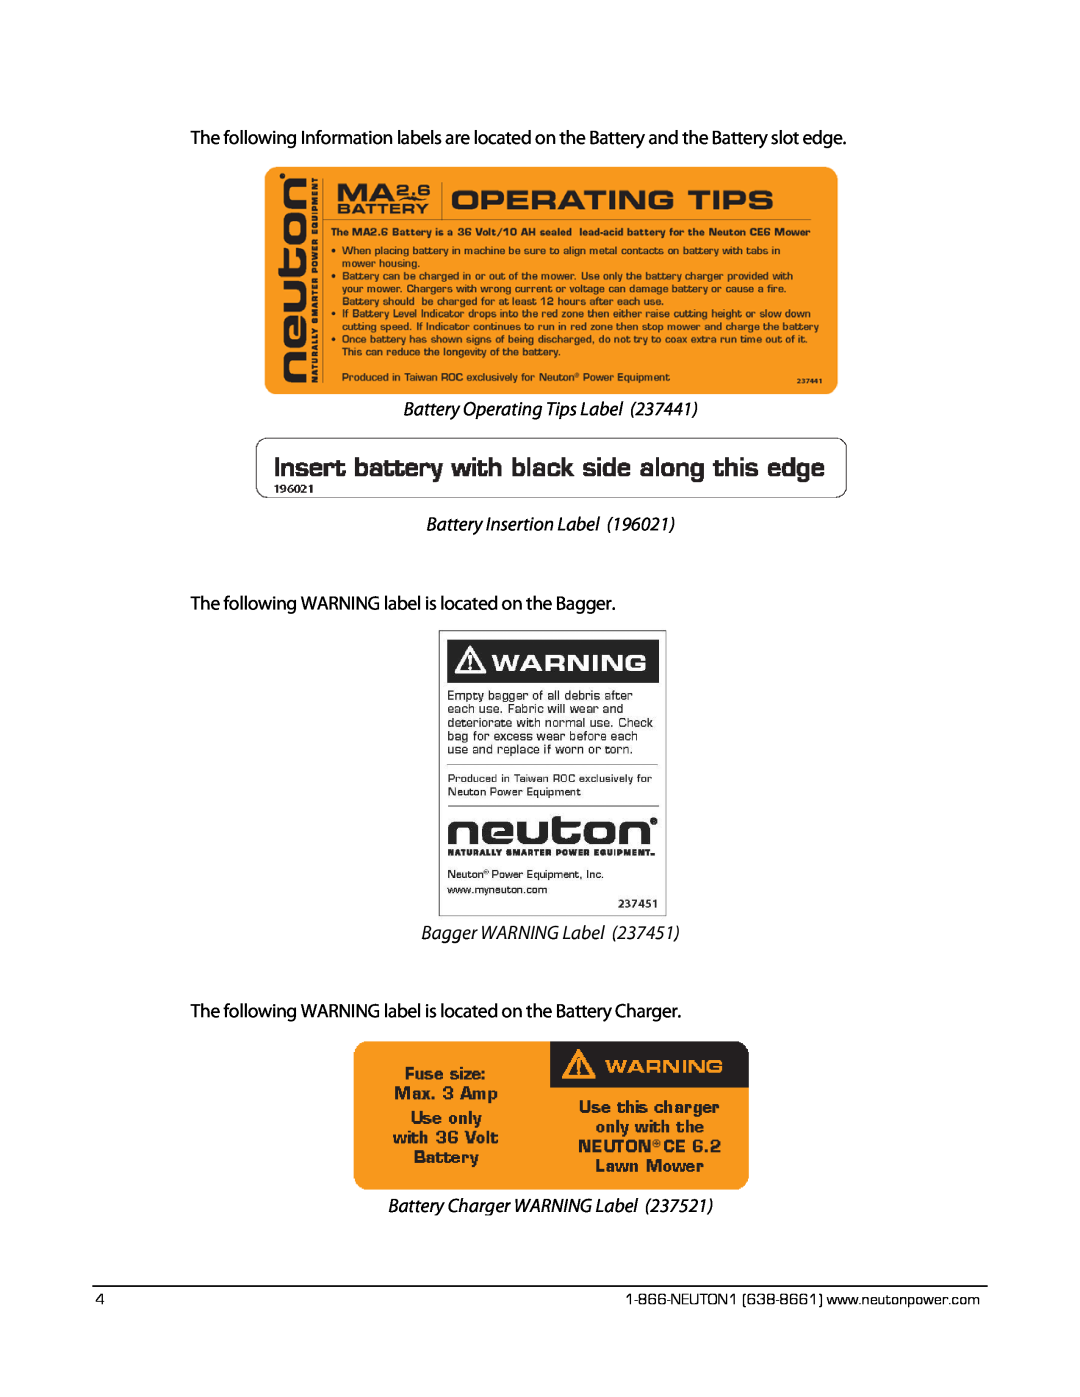 Neuton CE 6.2 Battery Operating Tips Label, Battery Insertion Label, Bagger WARNING Label, Battery Charger WARNING Label 